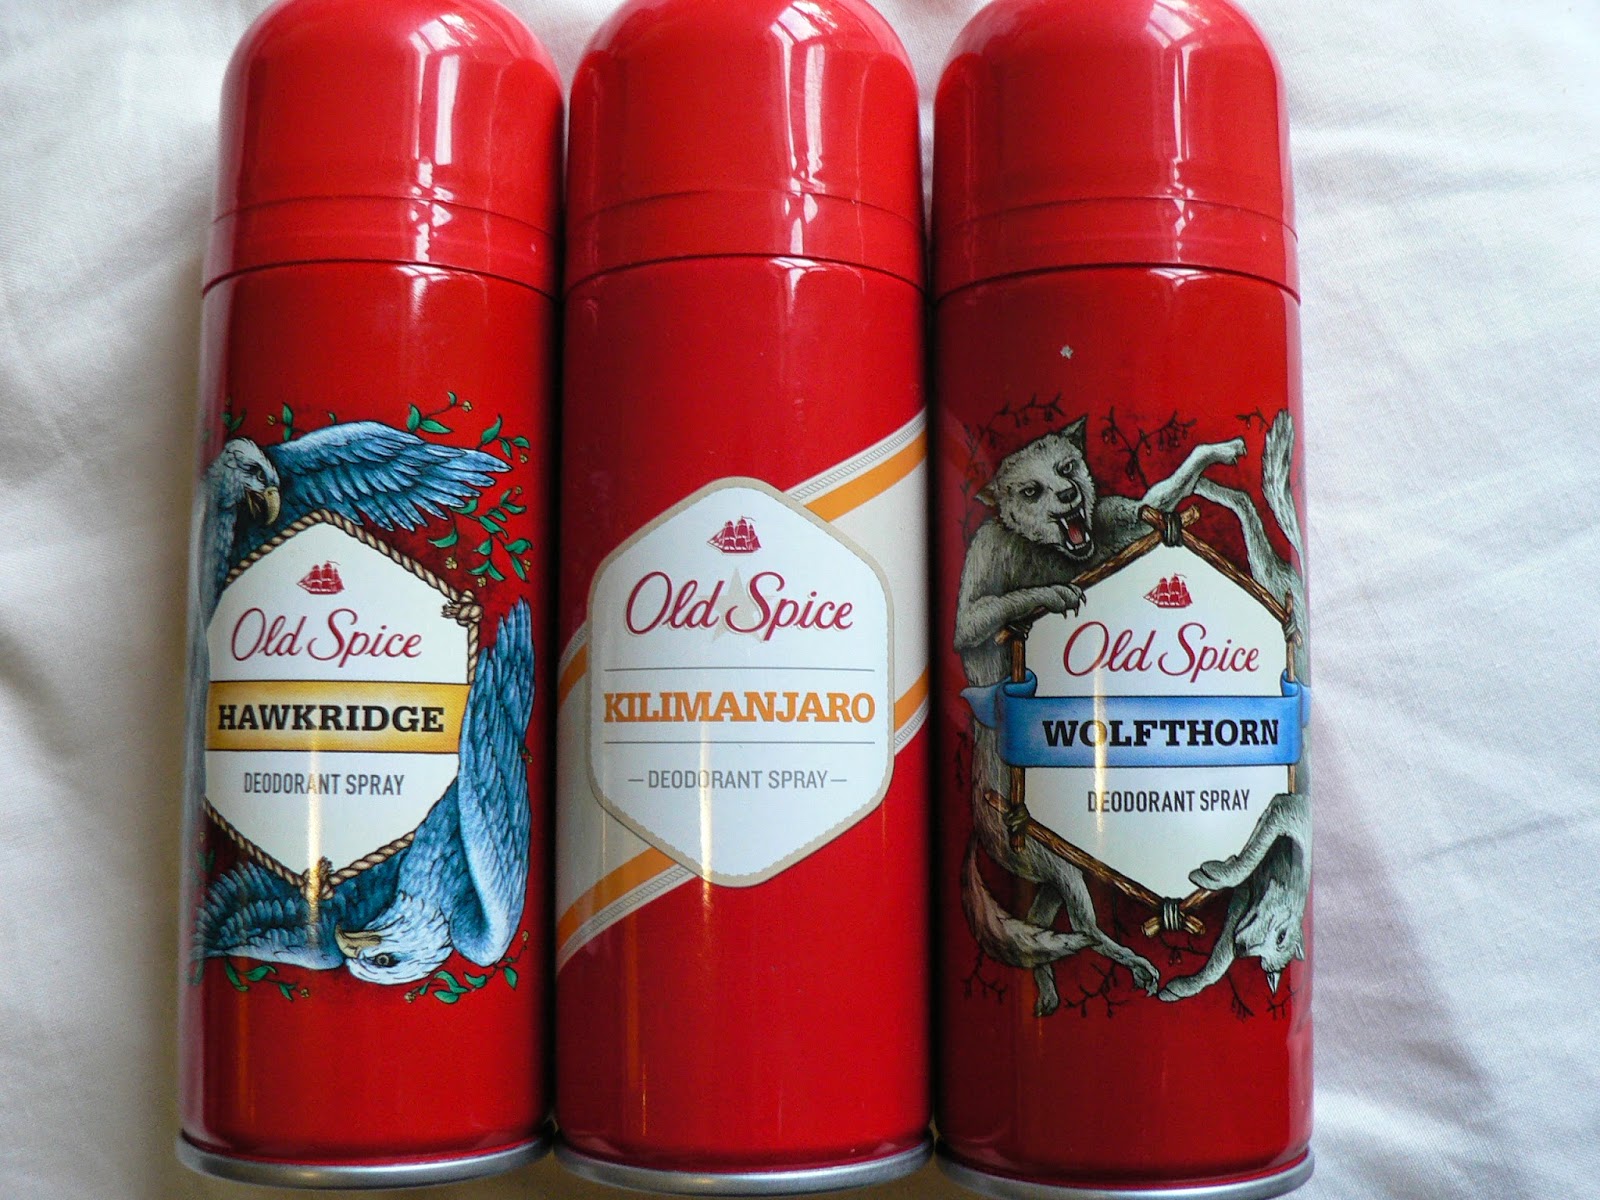 The Life's Way: Product - Old Spice Deodorant Spray